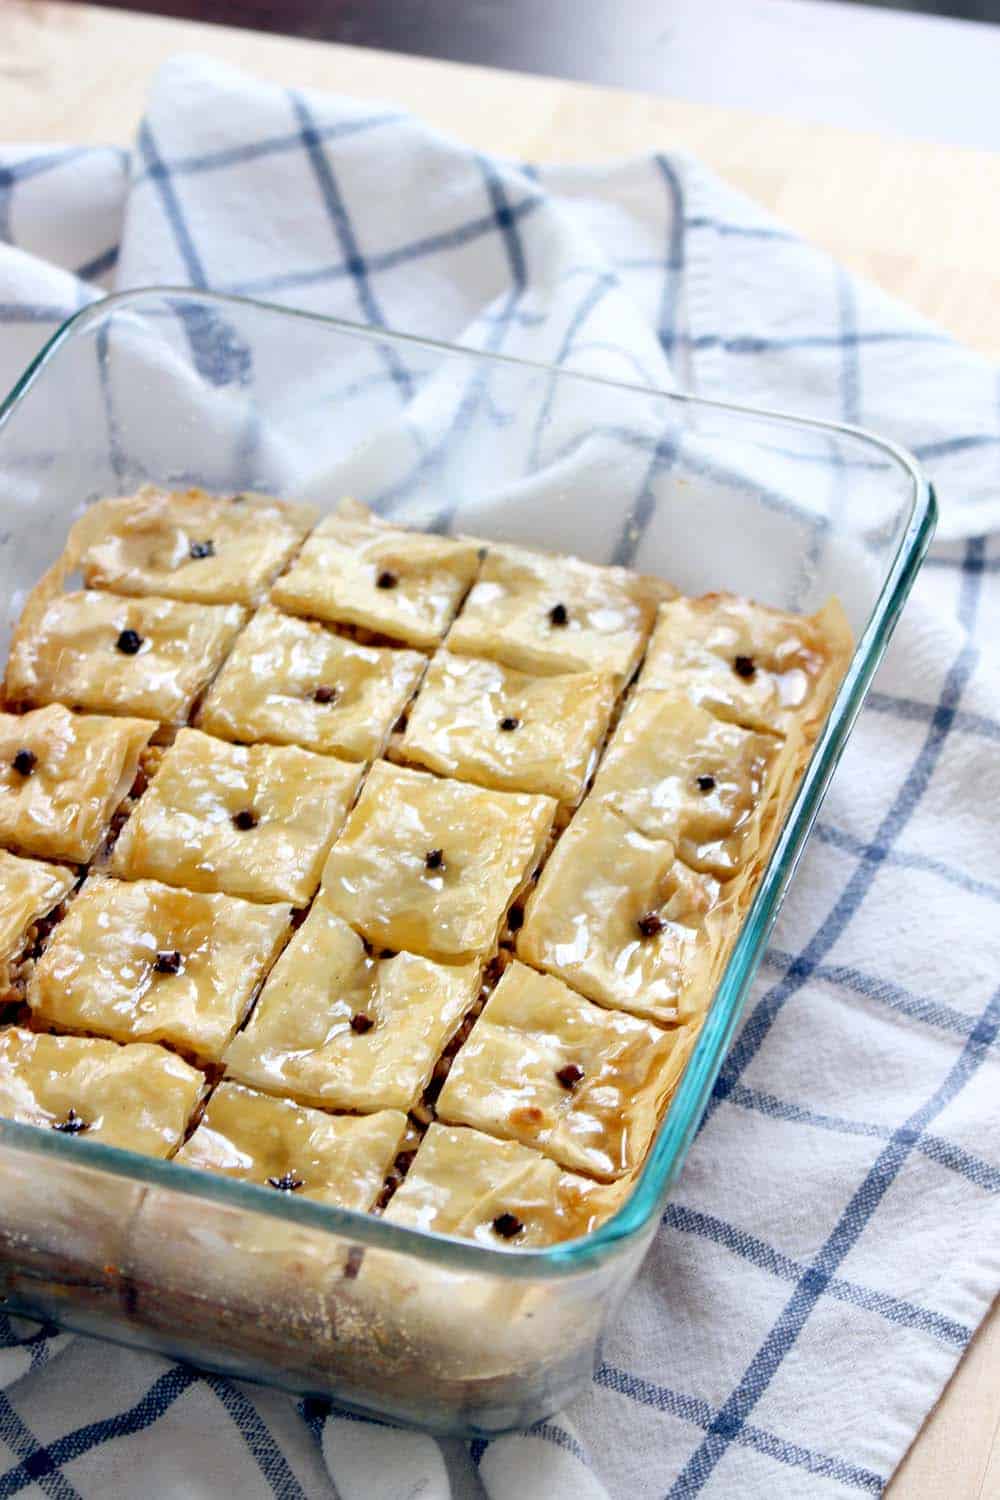 A glass casserole dish holding baklava that has been cut into squares and garnished with cloves.